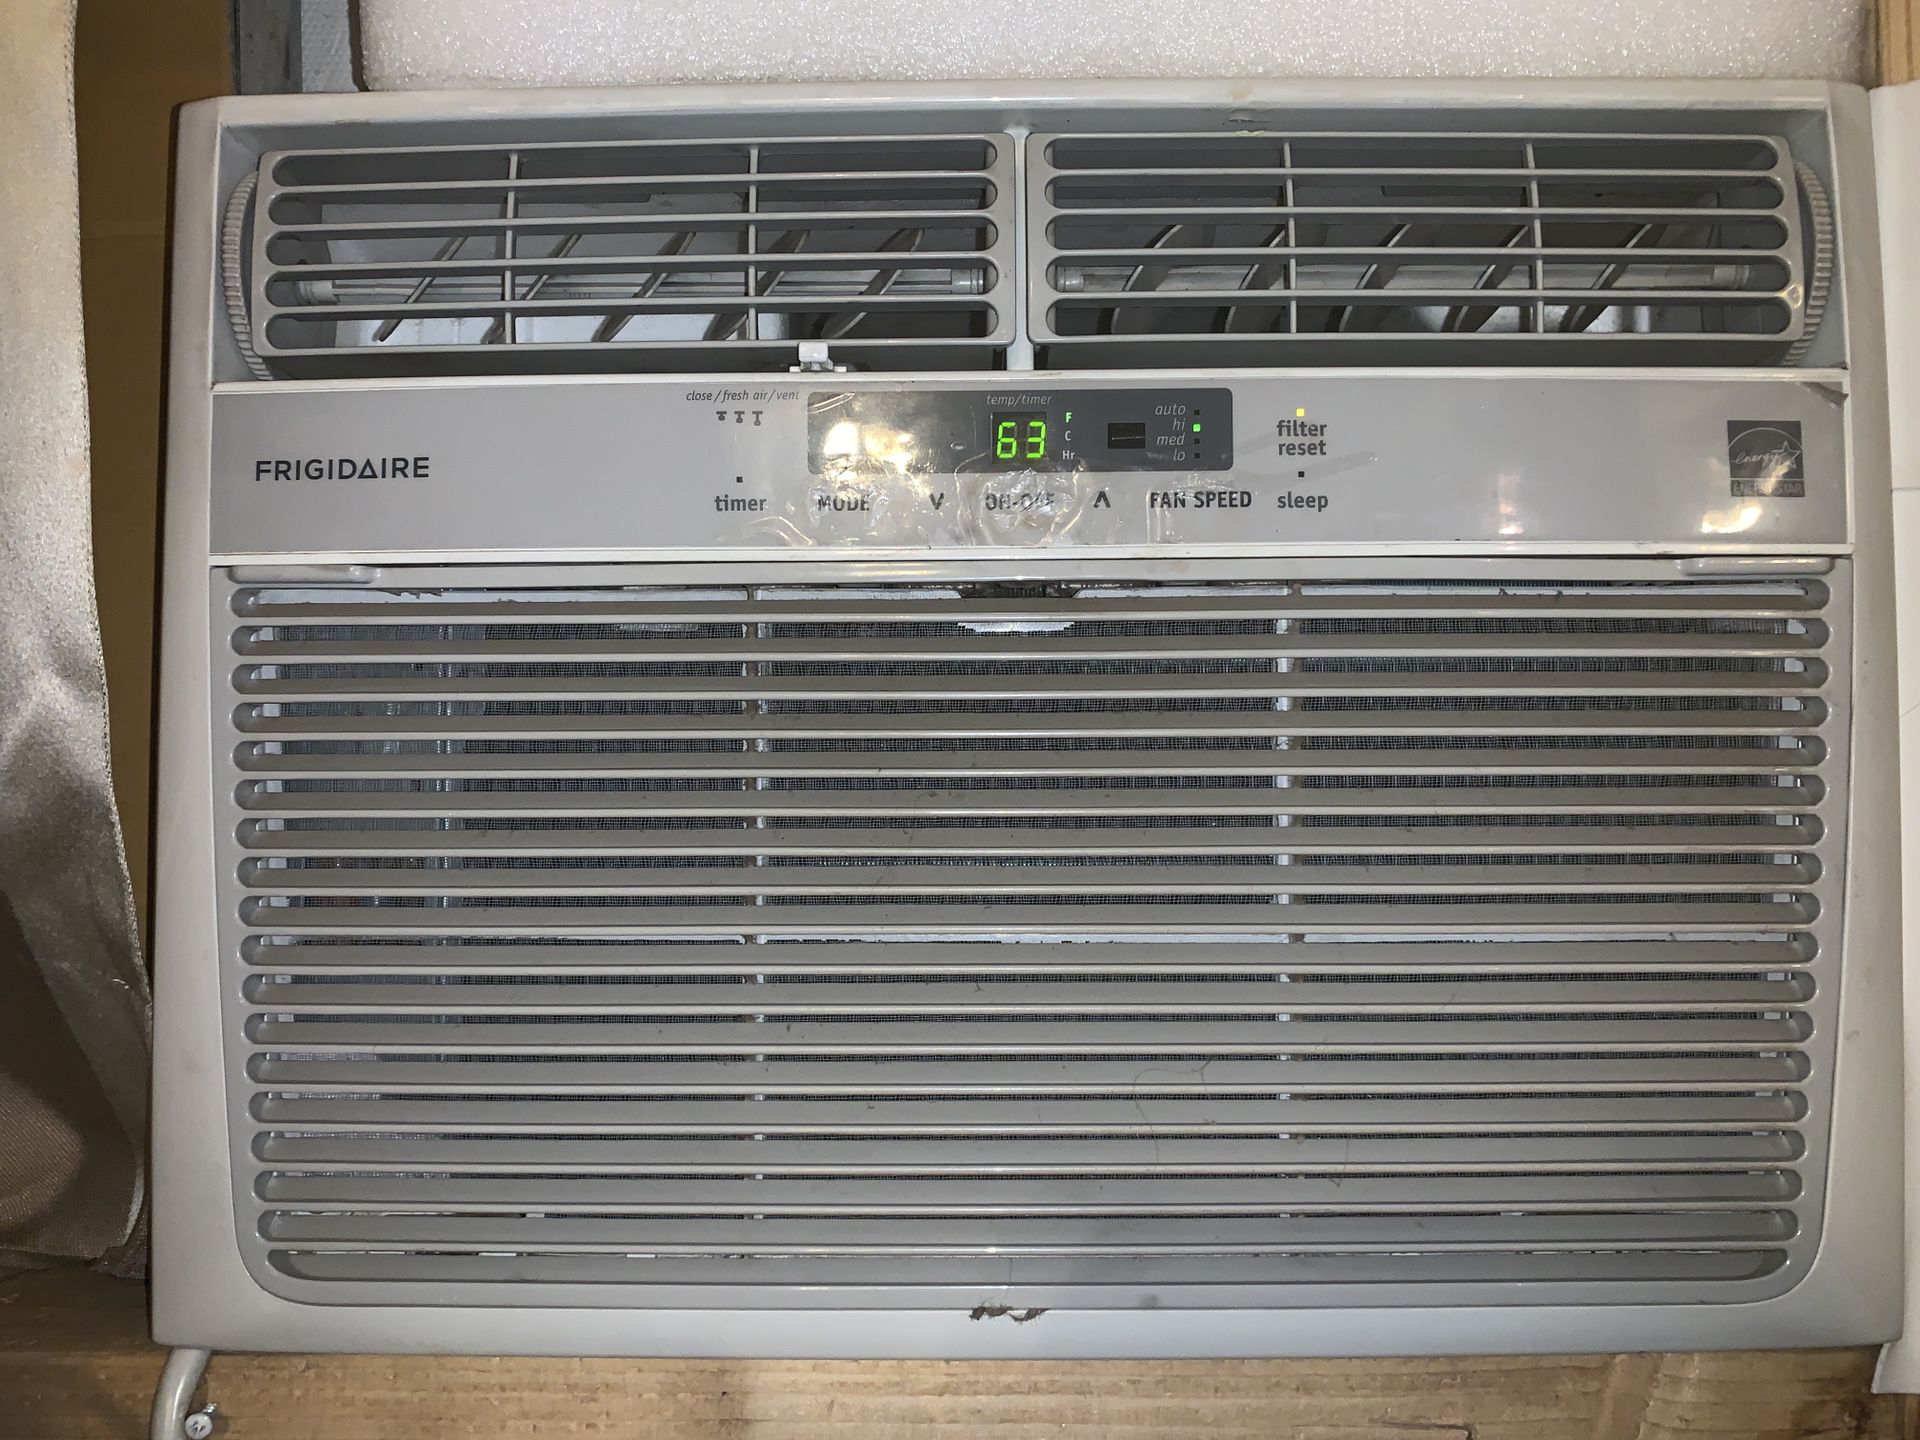 Frigidaire ac window unit OBO within 48 hrs